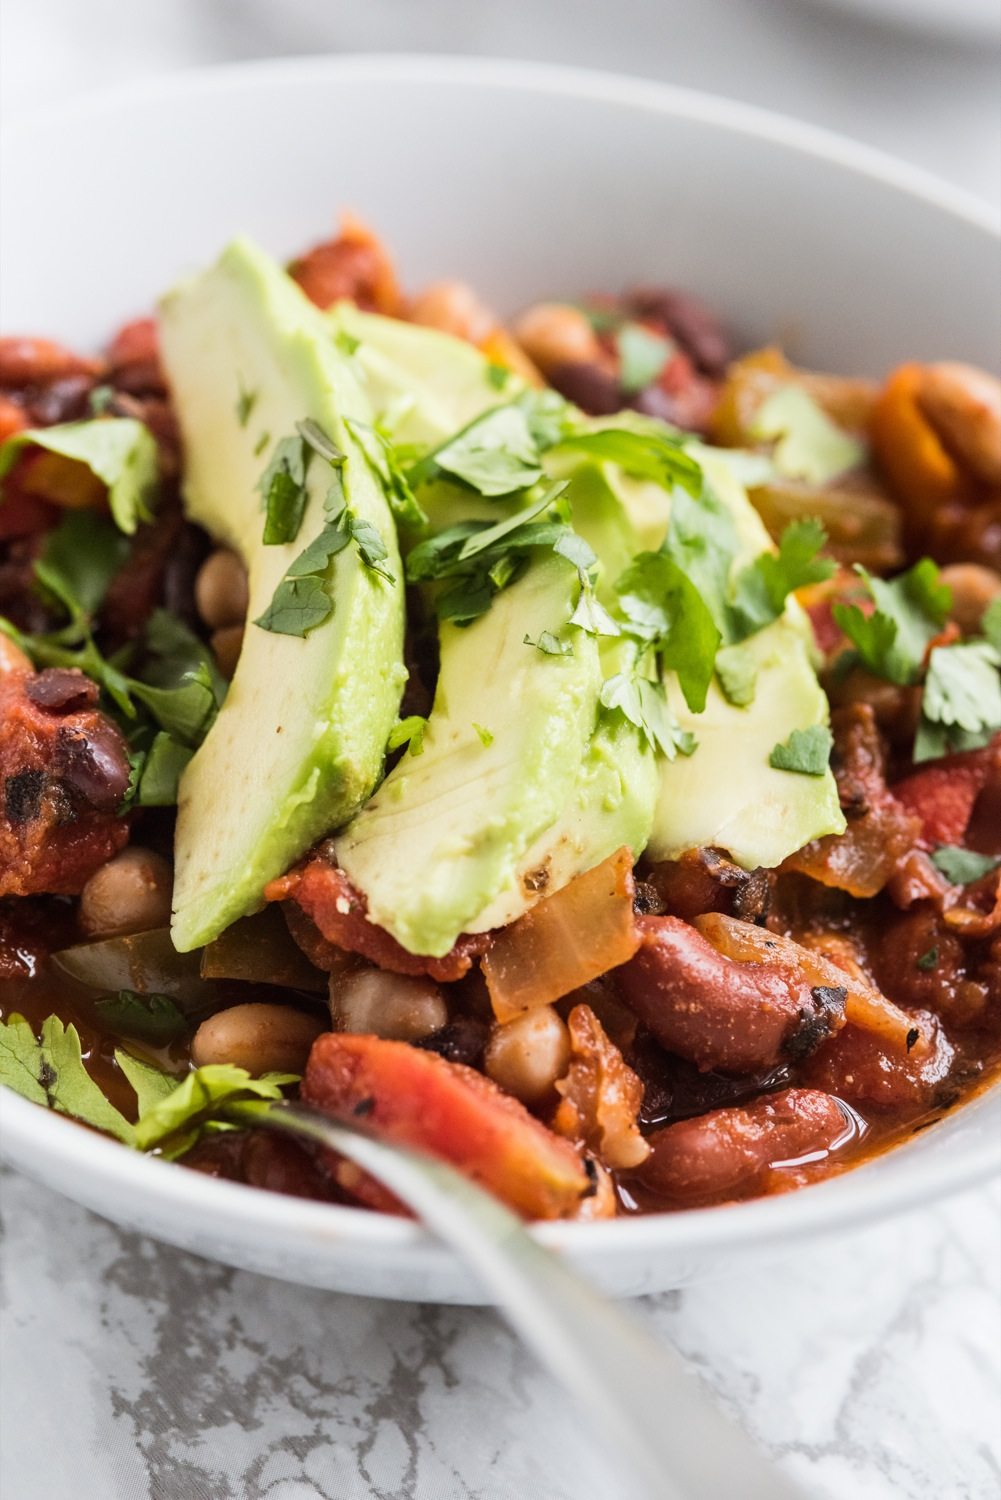 Best Vegan Chili Recipe | Vegetarian chili, Super Bowl recipes, party ideas, entertaining tips and more from @cydconverse